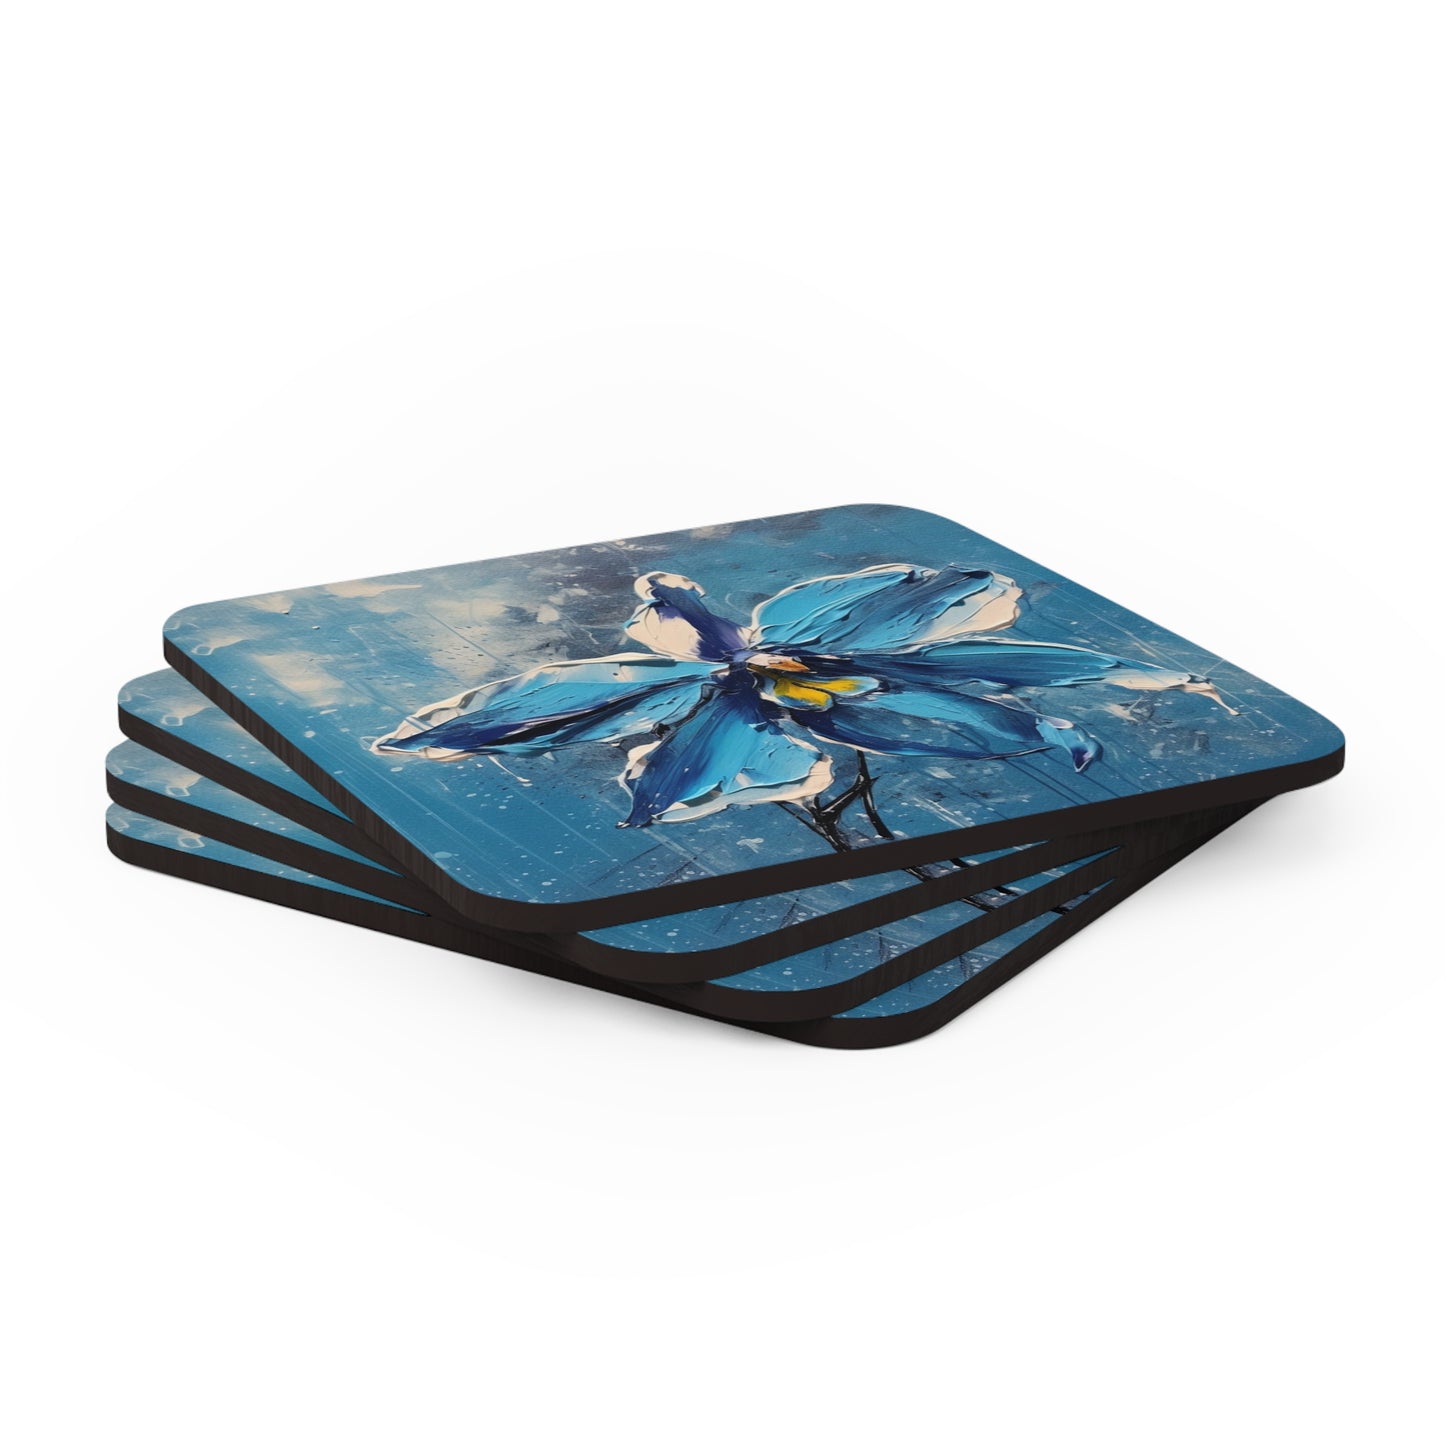 Abstract Backgrounds Corkwood Coaster Set: Blue Orchid Bliss in Artistic Abstraction